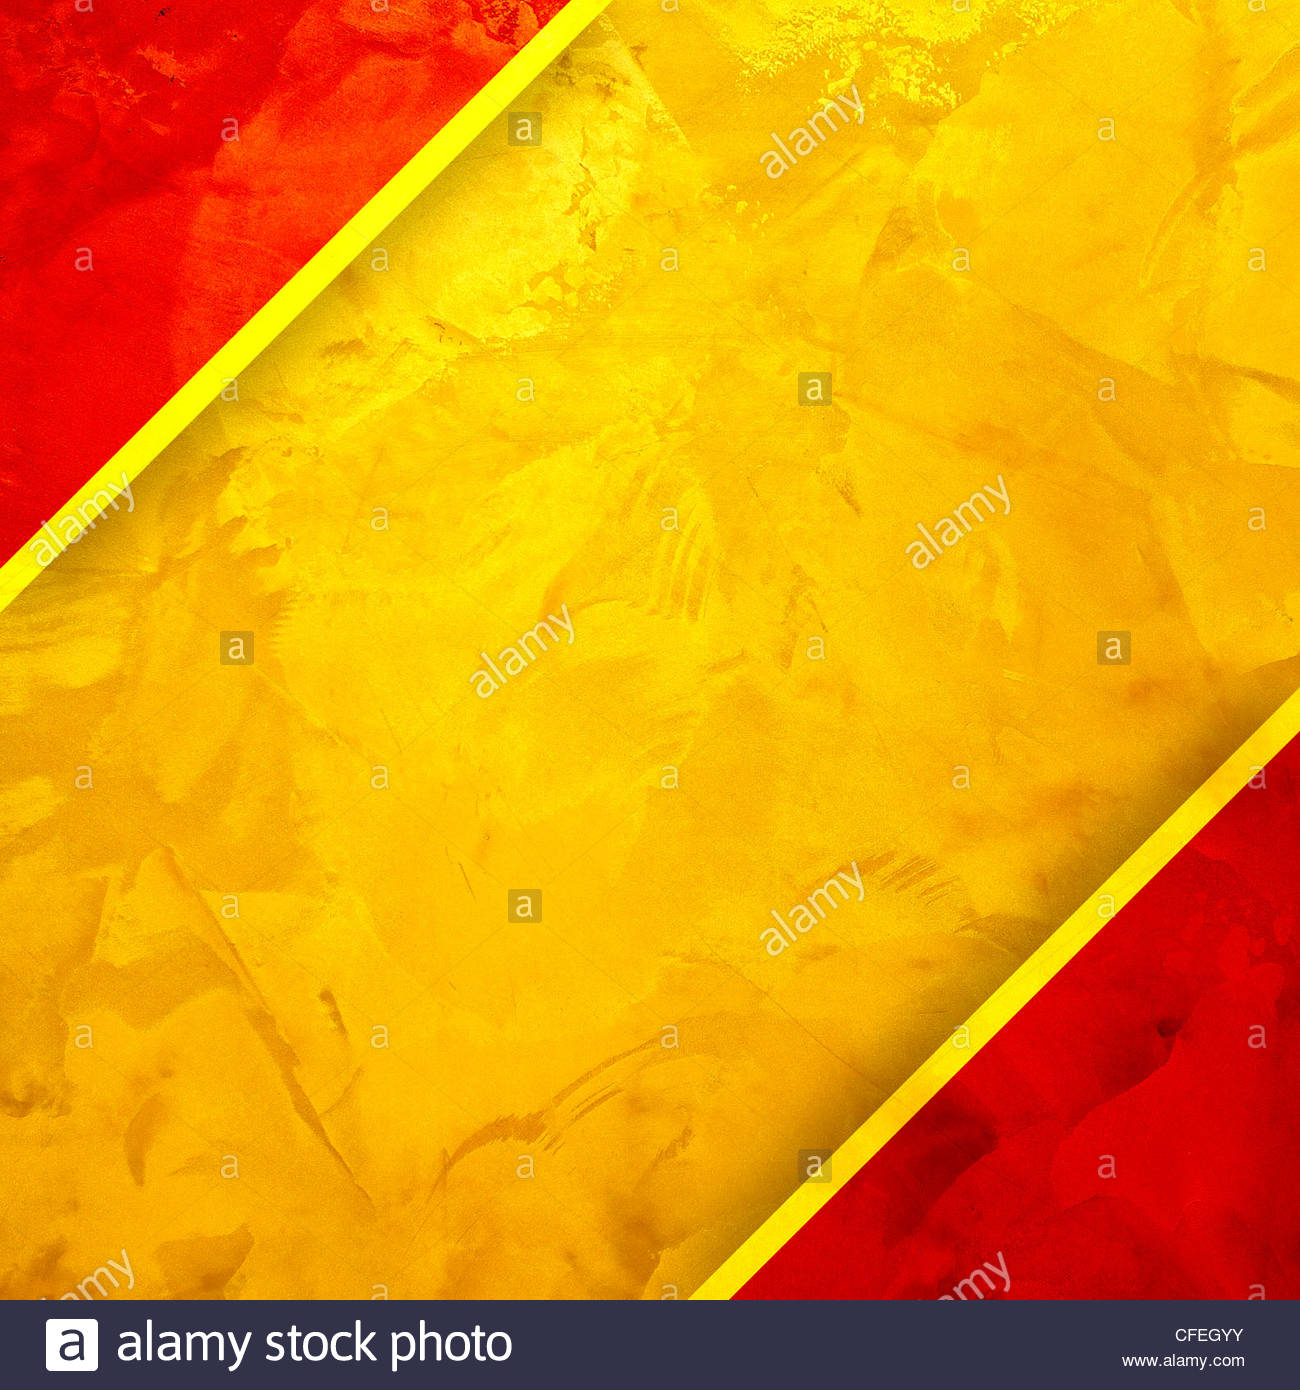 Yellow and red textured golden design background Stock Photo